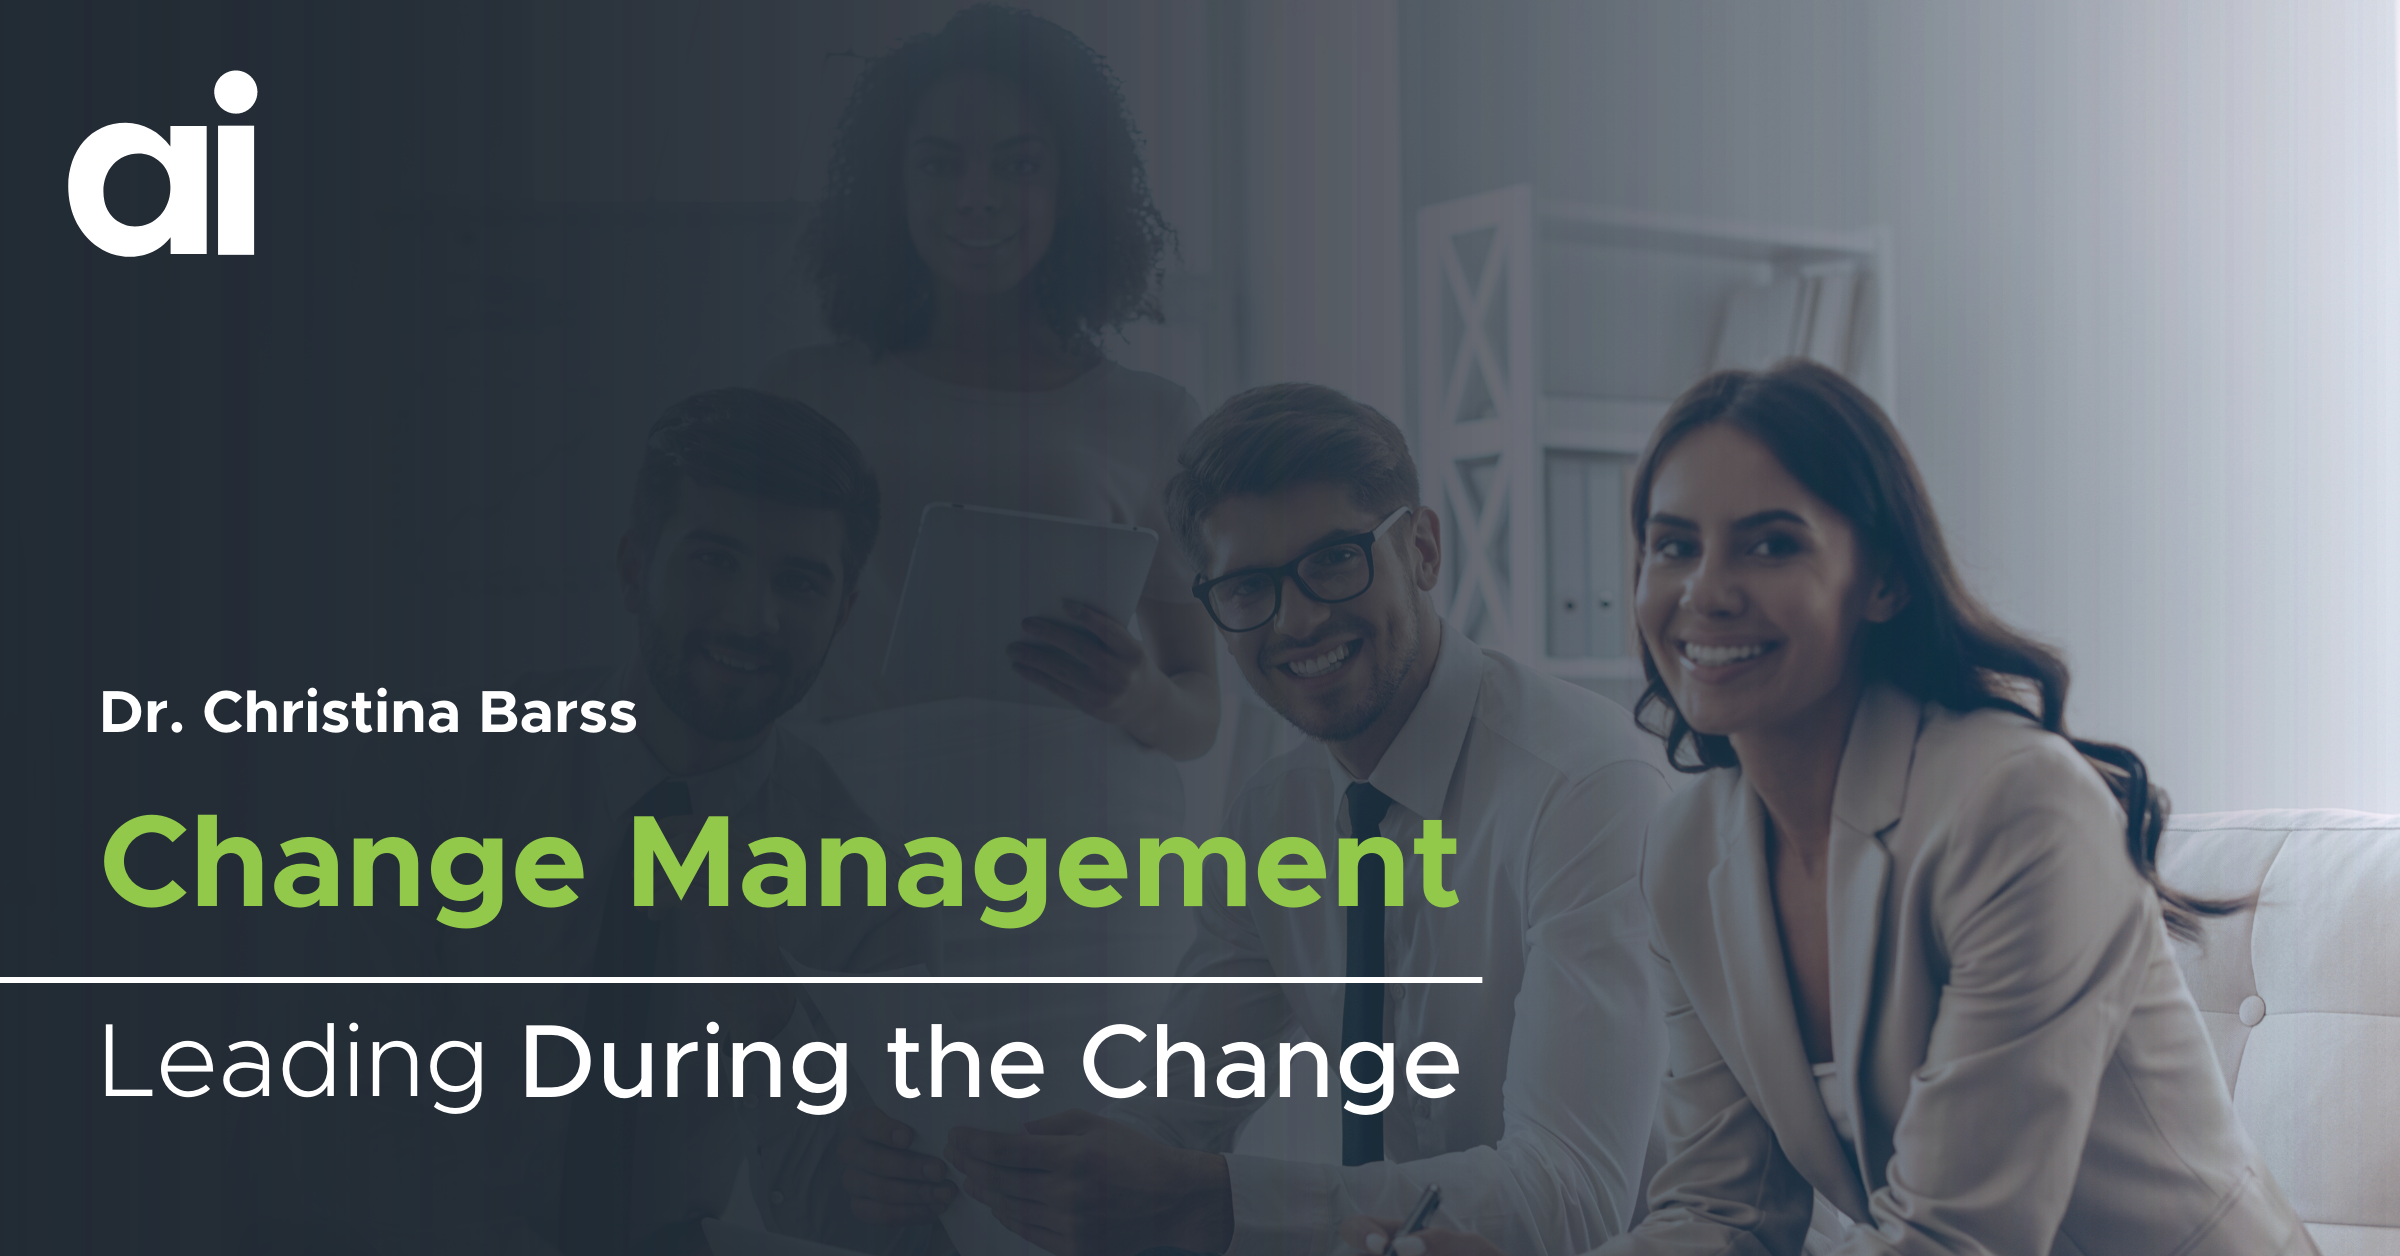 Change Management: Leading During the Change